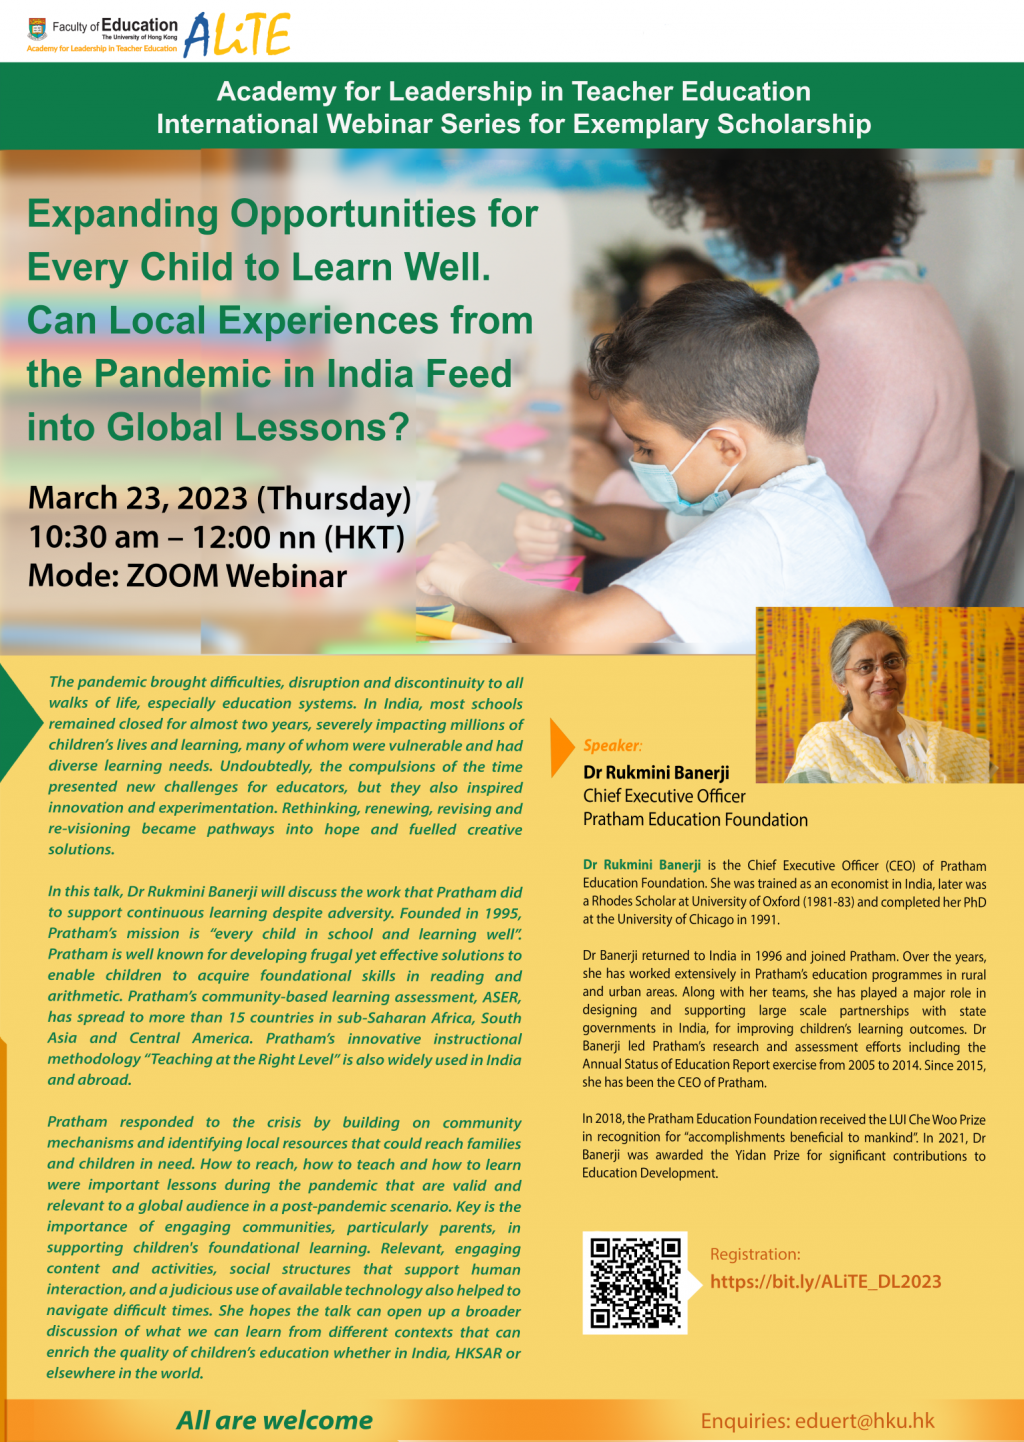 Expanding Opportunities for Every Child to Learn Well. Can Local Experiences from the Pandemic in India Feed into Global Lessons?